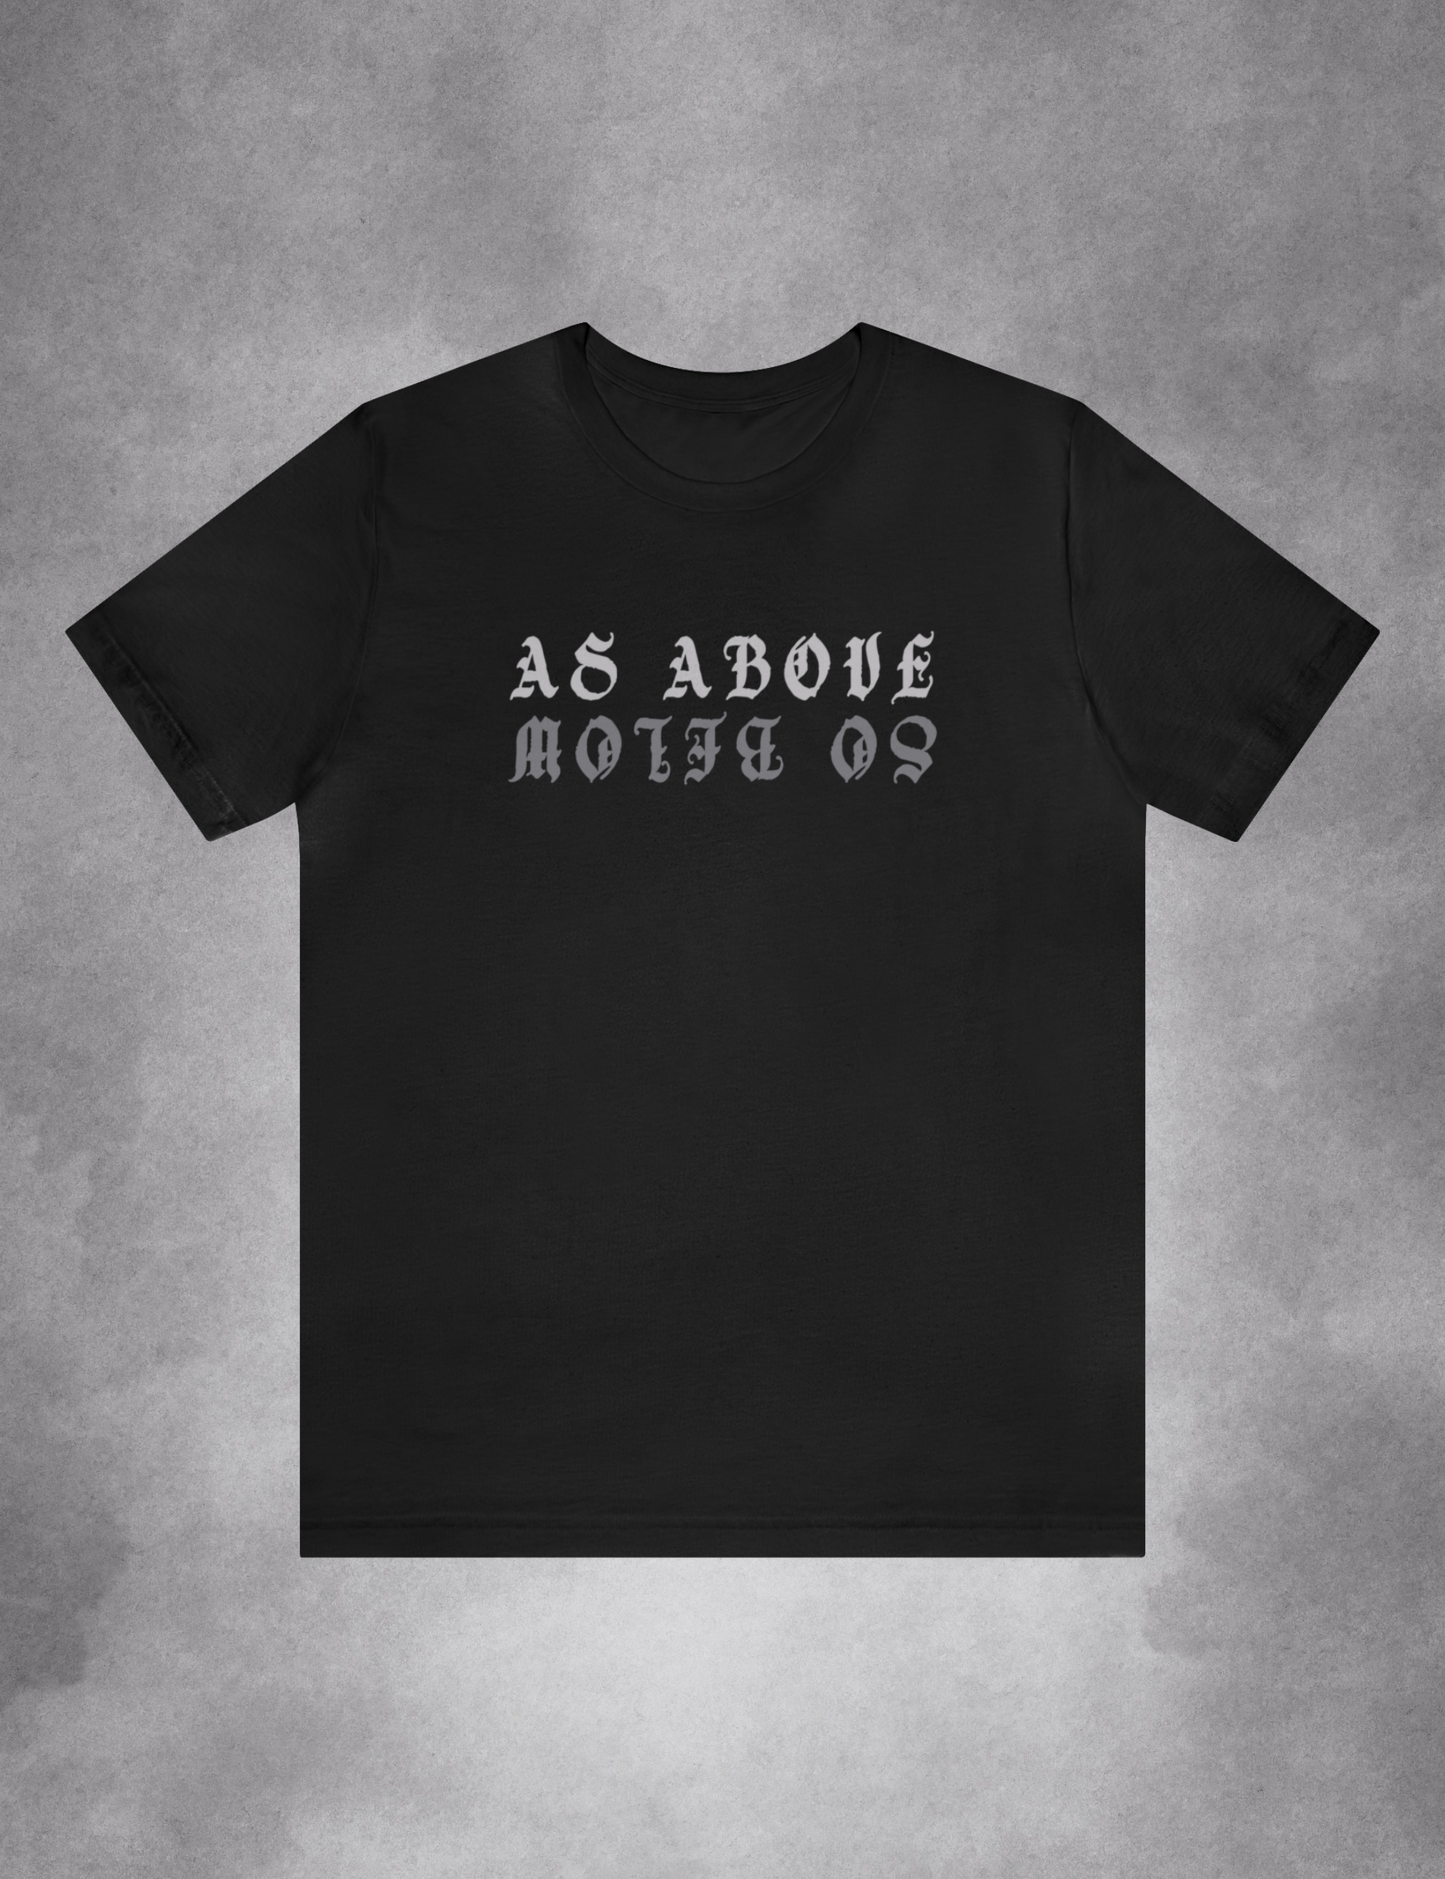 As Above So Below Gothic Shirt